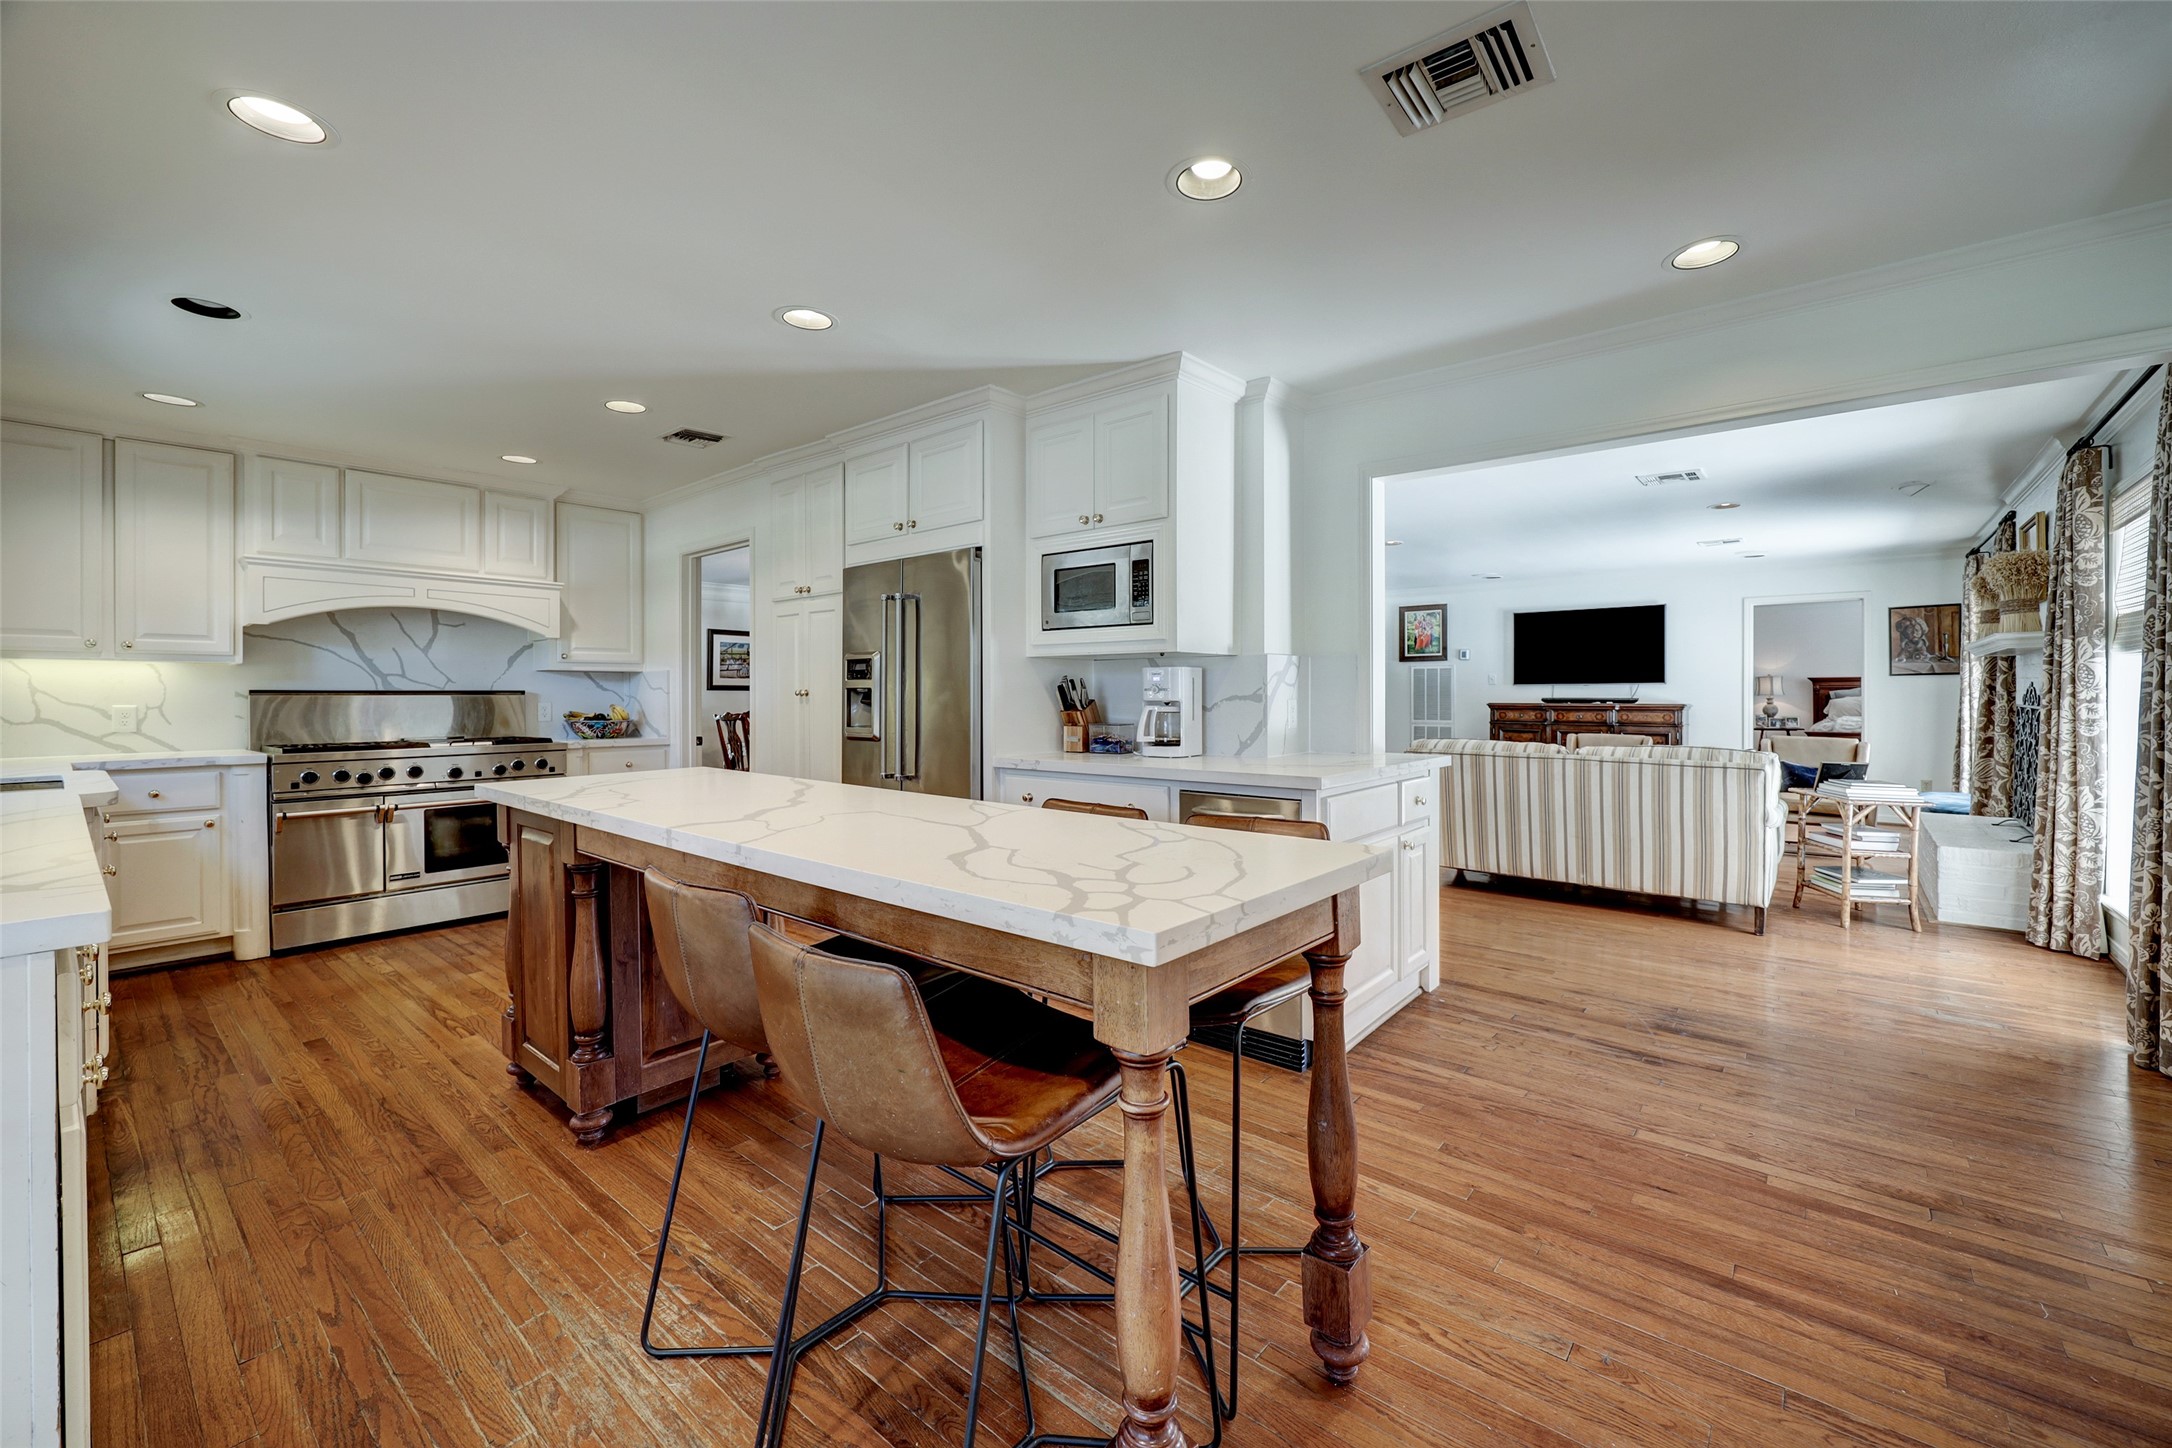 Kitchen features a beautiful island with bar seating, top of the line appliances, and upgraded Quartz countertops.